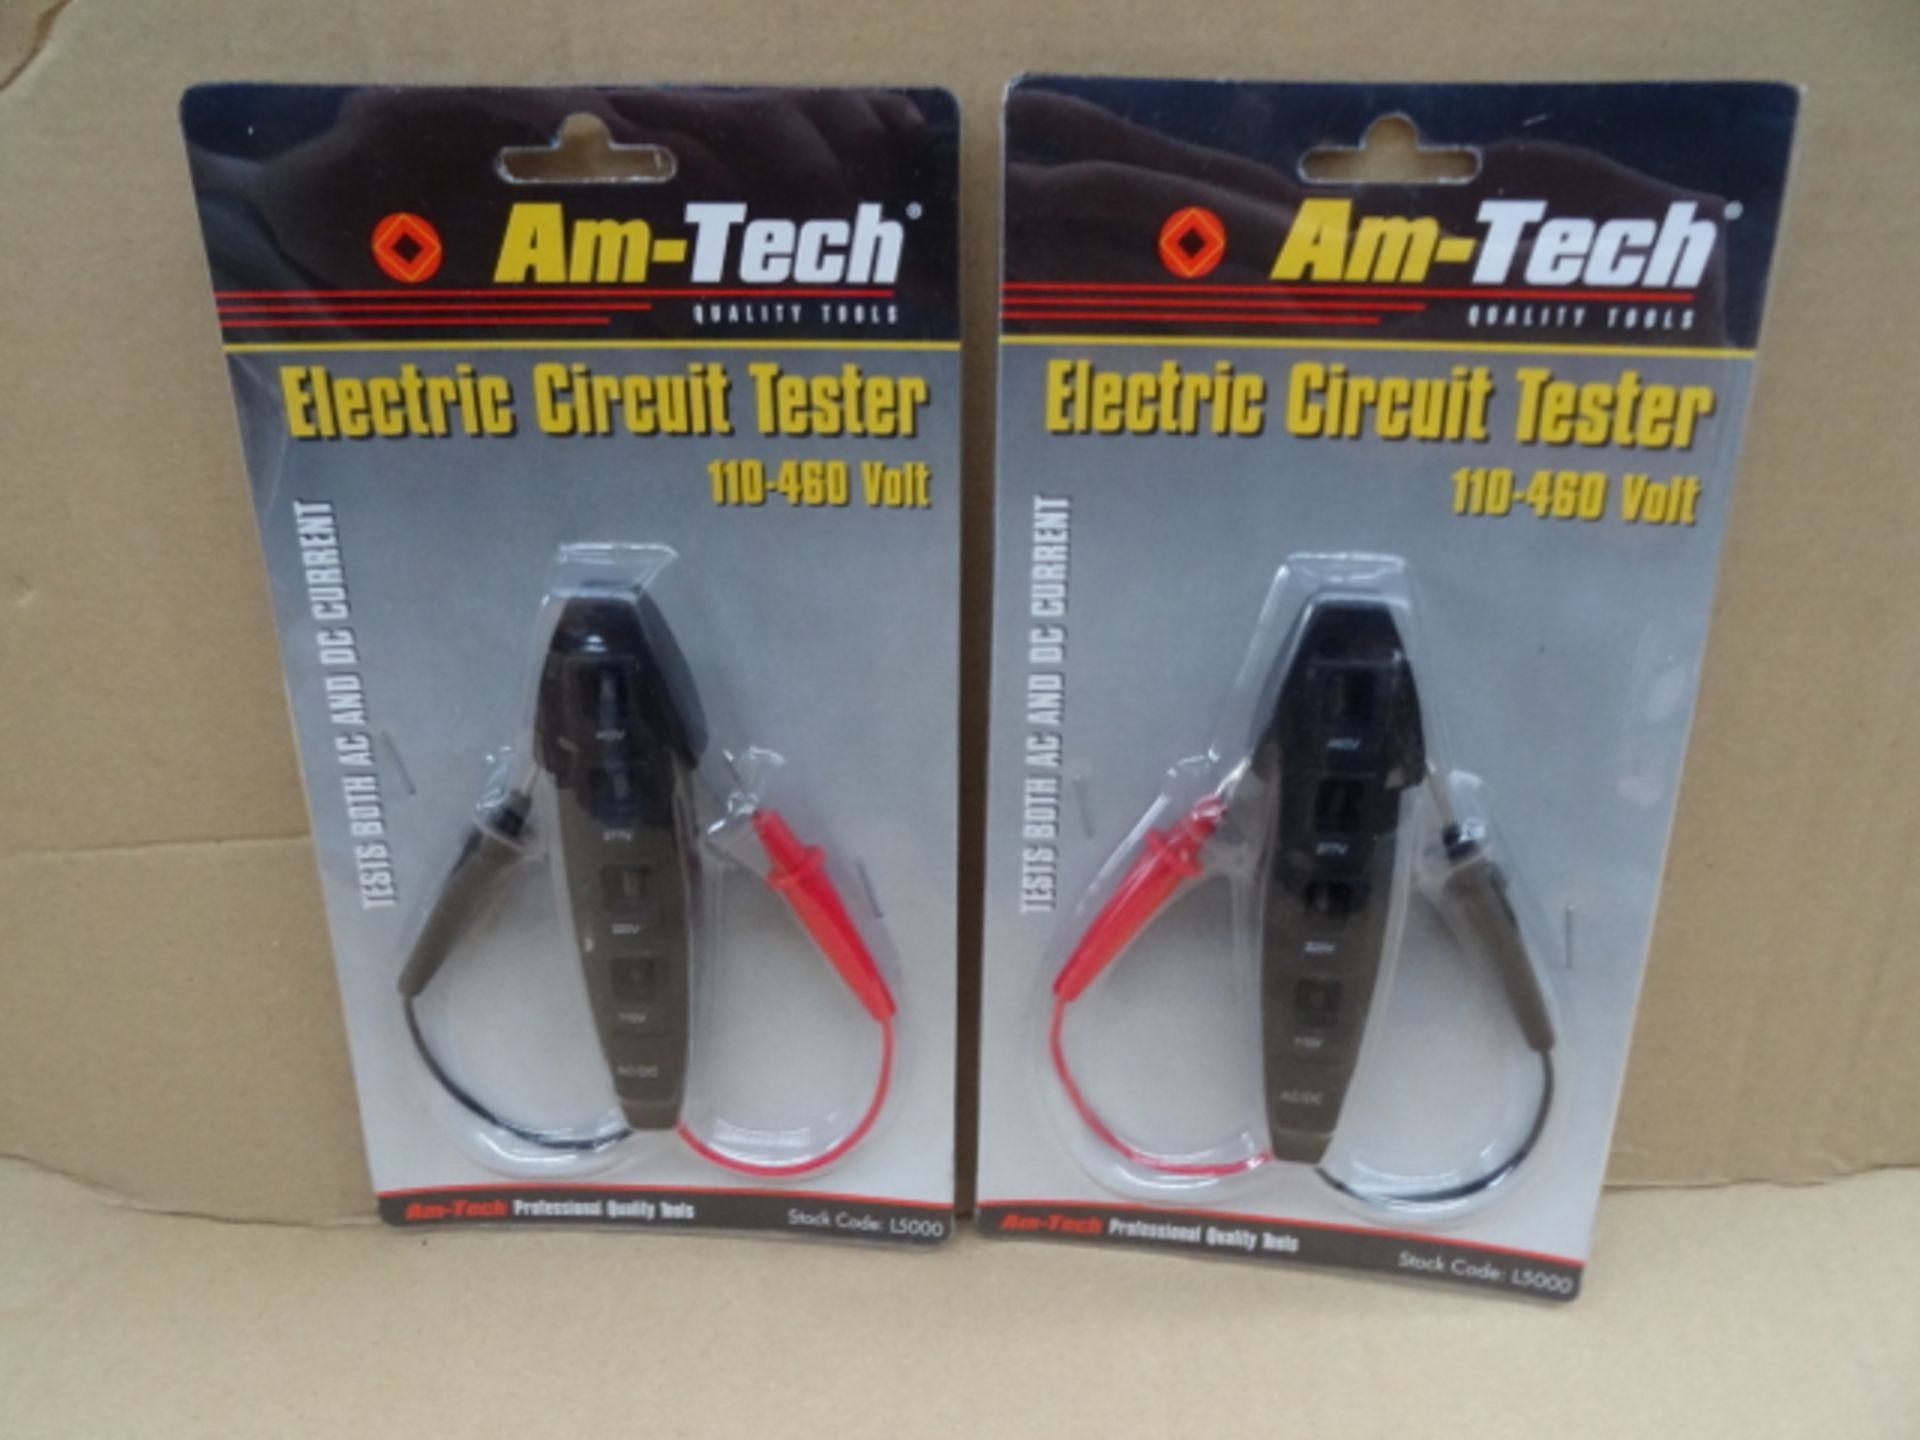 48 x Am-Tech Quality Tools. Electric Circuit Tester. 110-460 Volt. Tests both AC and DC Current.